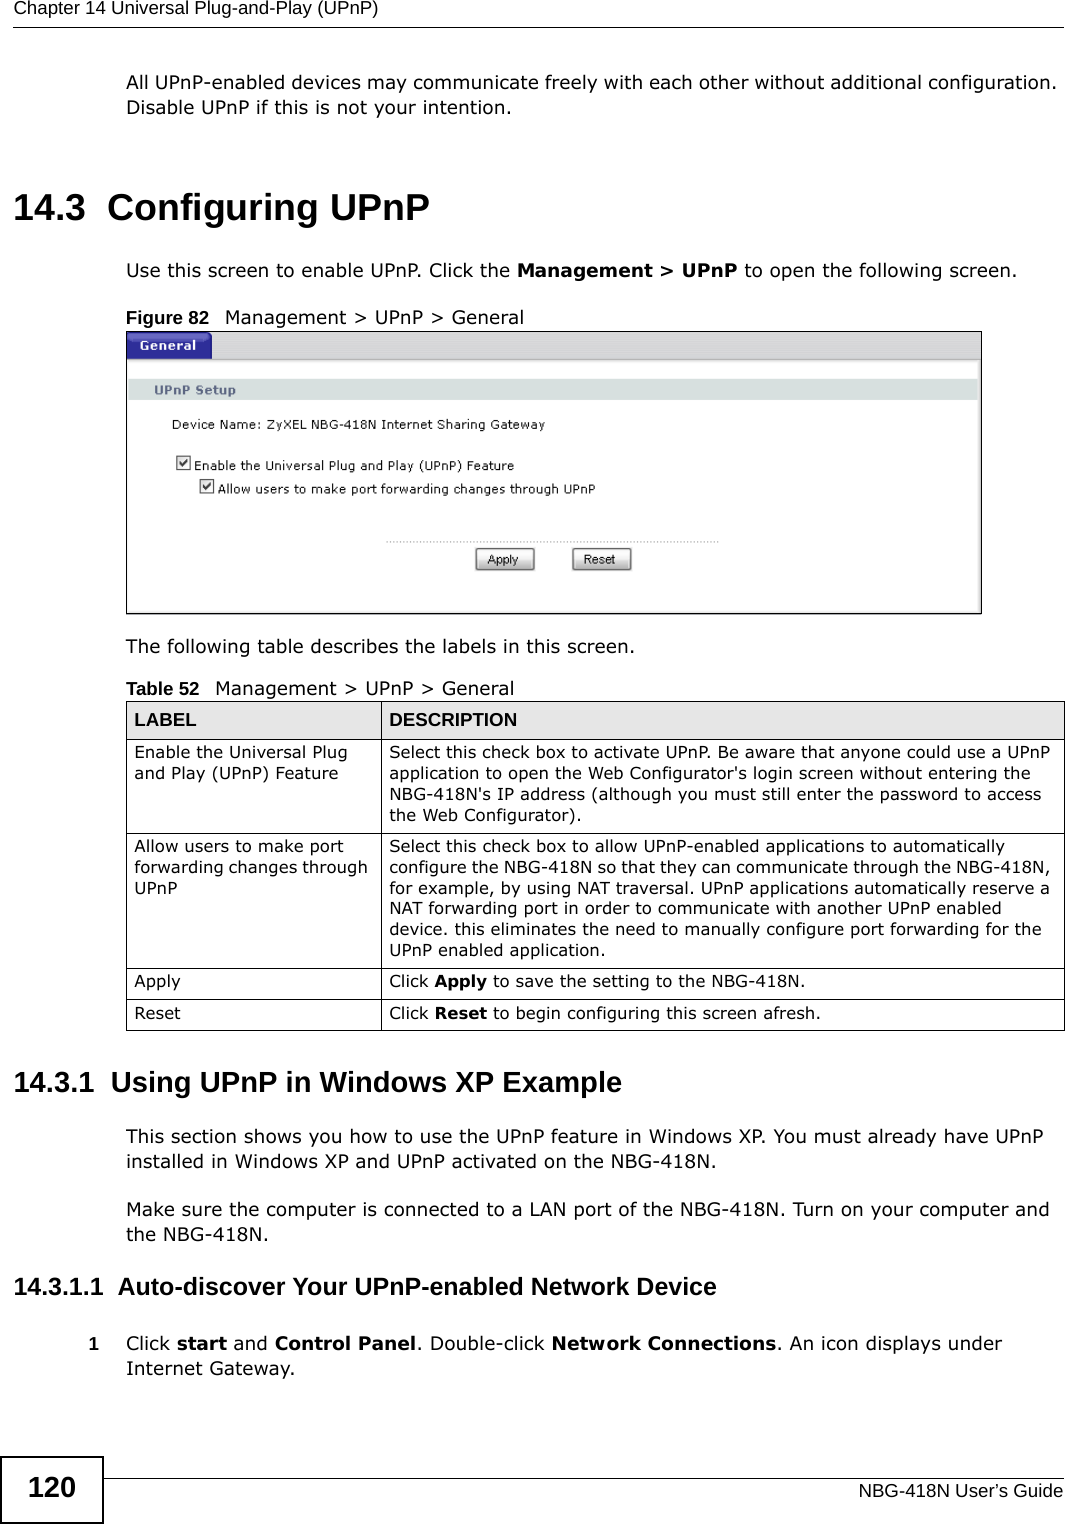 Chapter 14 Universal Plug-and-Play (UPnP)NBG-418N User’s Guide120All UPnP-enabled devices may communicate freely with each other without additional configuration. Disable UPnP if this is not your intention. 14.3  Configuring UPnPUse this screen to enable UPnP. Click the Management &gt; UPnP to open the following screen.Figure 82   Management &gt; UPnP &gt; General The following table describes the labels in this screen. 14.3.1  Using UPnP in Windows XP ExampleThis section shows you how to use the UPnP feature in Windows XP. You must already have UPnP installed in Windows XP and UPnP activated on the NBG-418N.Make sure the computer is connected to a LAN port of the NBG-418N. Turn on your computer and the NBG-418N. 14.3.1.1  Auto-discover Your UPnP-enabled Network Device1Click start and Control Panel. Double-click Network Connections. An icon displays under Internet Gateway.Table 52   Management &gt; UPnP &gt; GeneralLABEL DESCRIPTIONEnable the Universal Plug and Play (UPnP) FeatureSelect this check box to activate UPnP. Be aware that anyone could use a UPnP application to open the Web Configurator&apos;s login screen without entering the NBG-418N&apos;s IP address (although you must still enter the password to access the Web Configurator).Allow users to make port forwarding changes through UPnPSelect this check box to allow UPnP-enabled applications to automatically configure the NBG-418N so that they can communicate through the NBG-418N, for example, by using NAT traversal. UPnP applications automatically reserve a NAT forwarding port in order to communicate with another UPnP enabled device. this eliminates the need to manually configure port forwarding for the UPnP enabled application. Apply Click Apply to save the setting to the NBG-418N.Reset Click Reset to begin configuring this screen afresh.